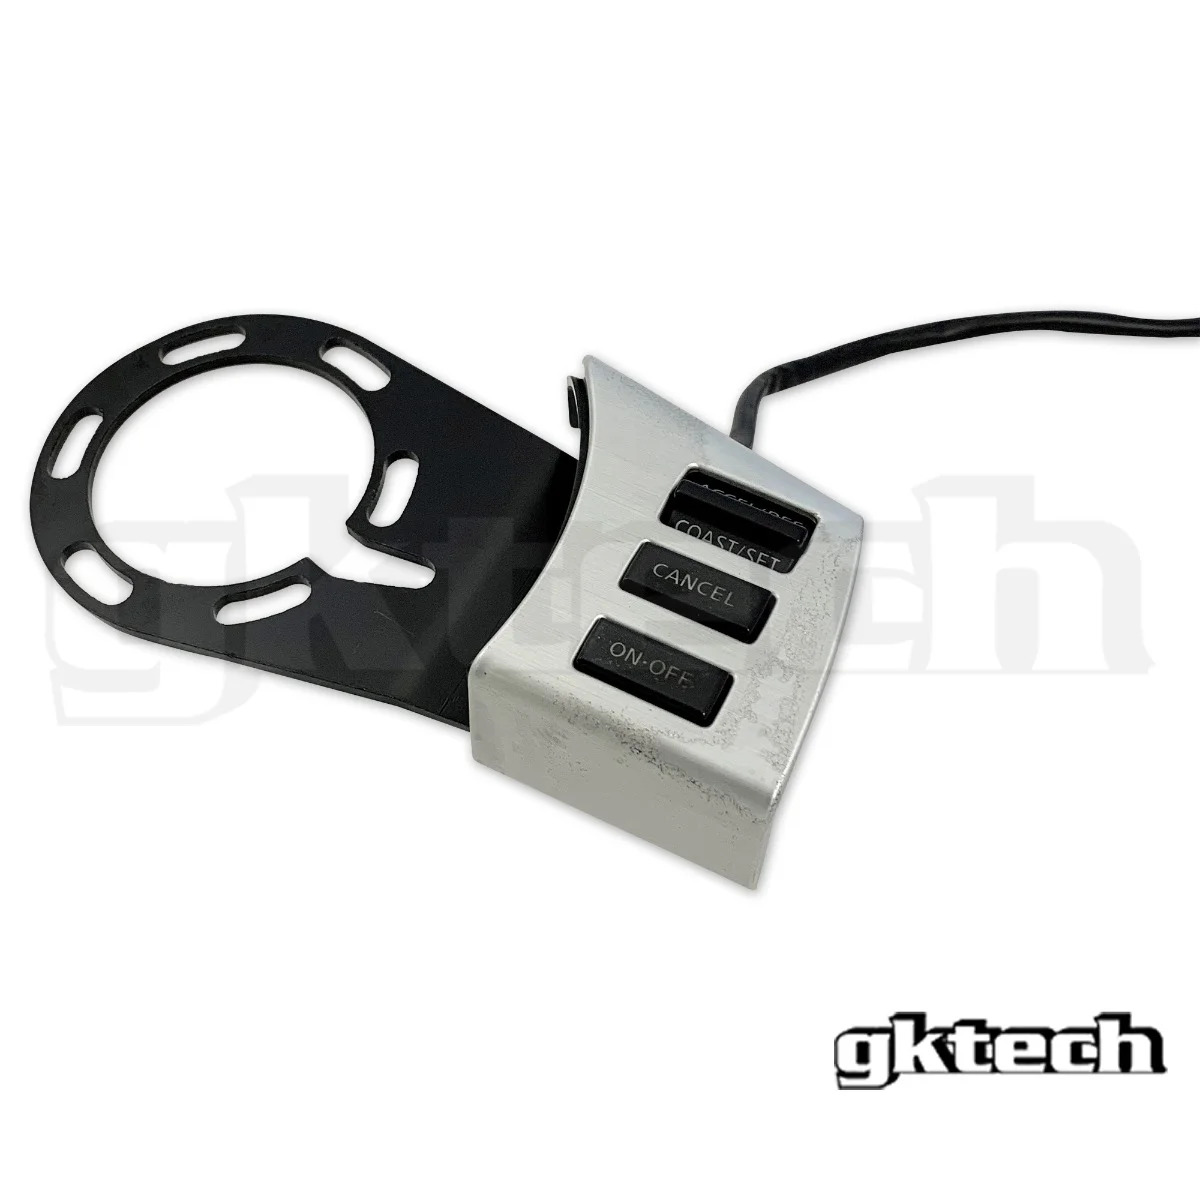 GKTECH Z33 350z steering wheel relocation kit for Cruise control only